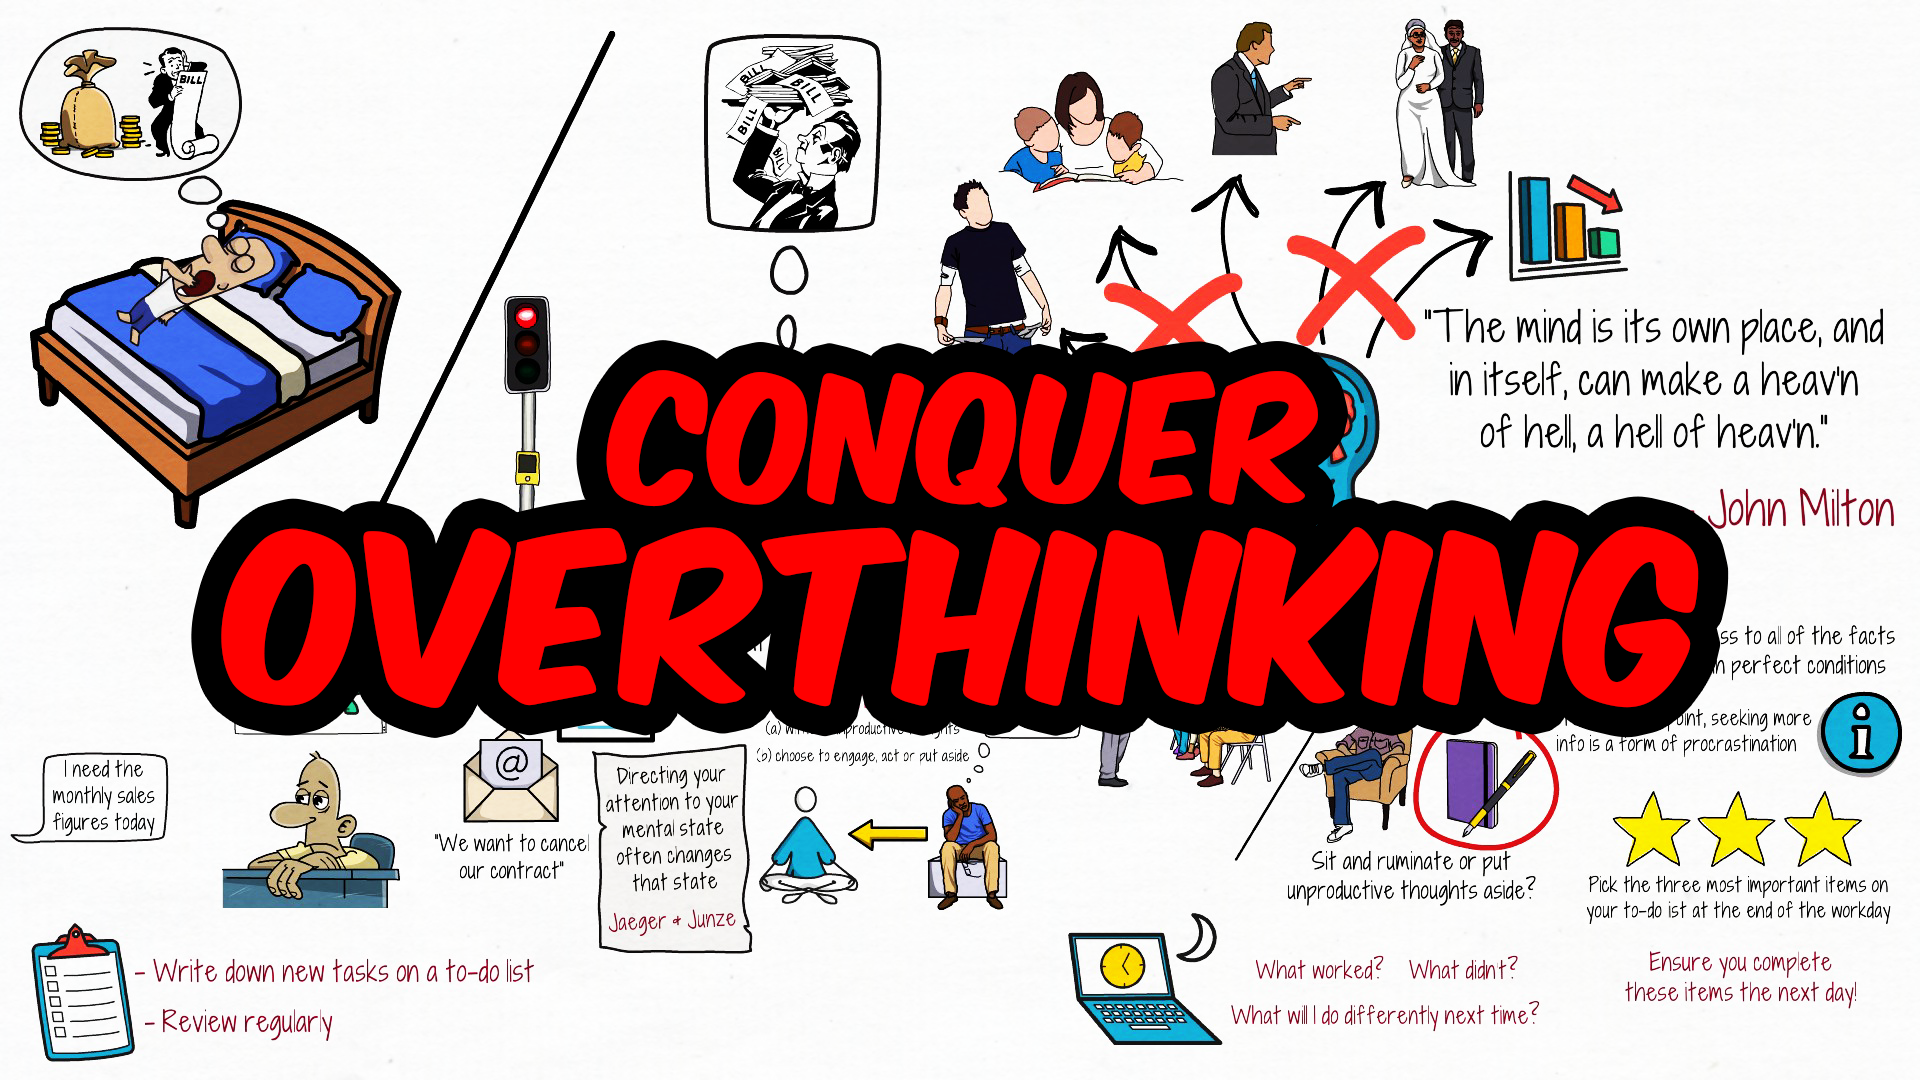 How to Conquer Overthinking in 4 Easy Steps